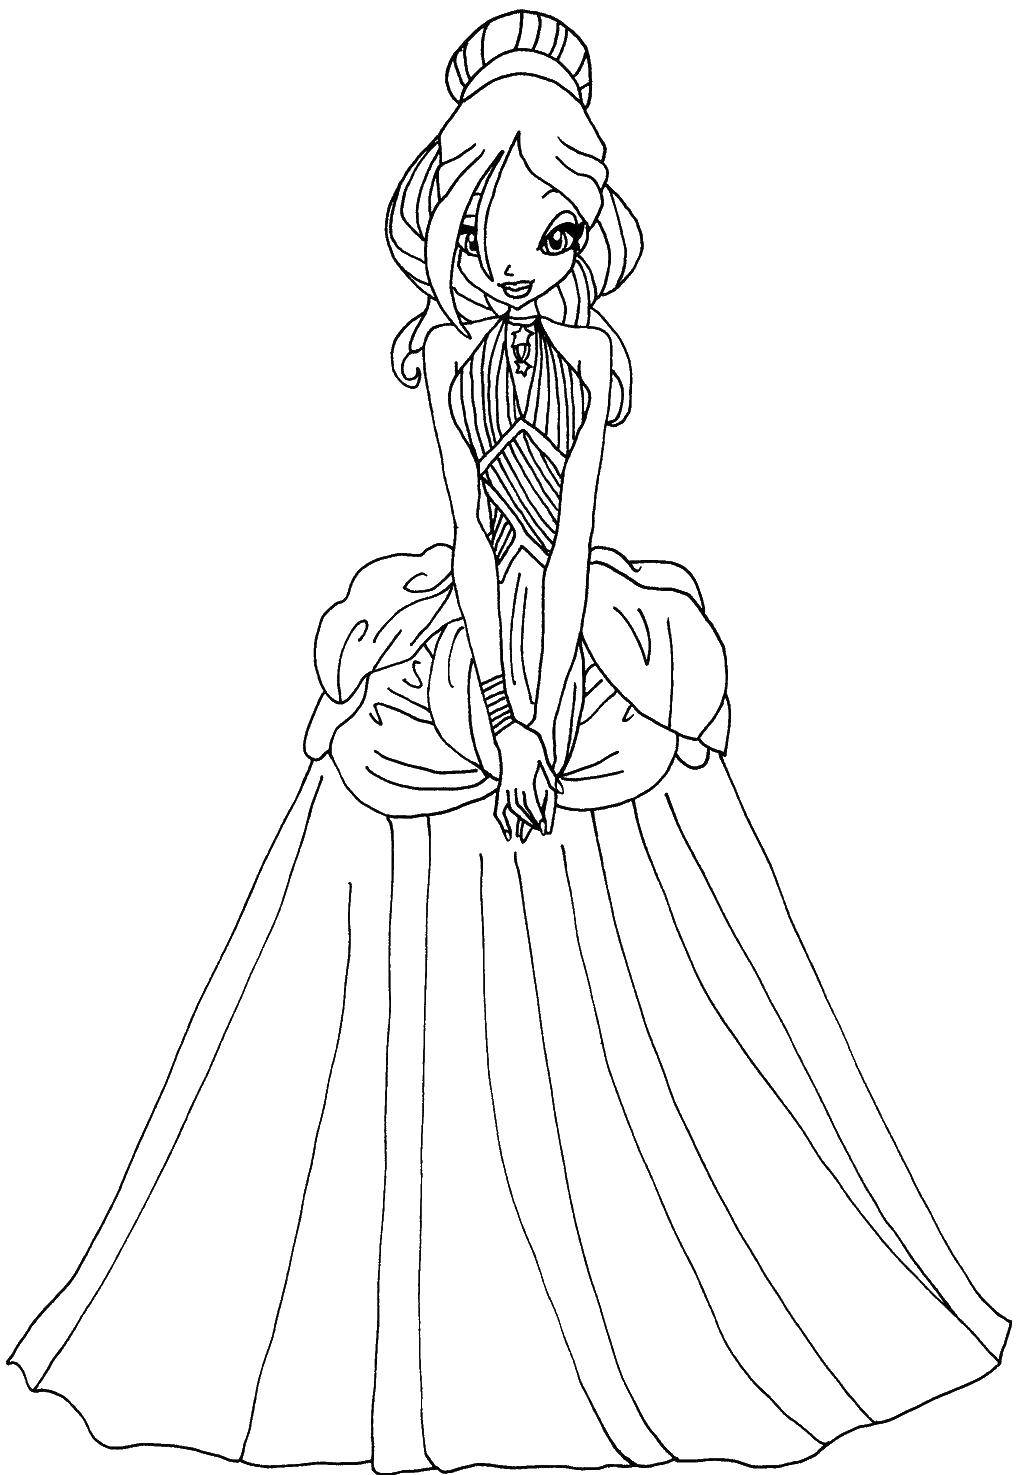 Coloring Winx in dress. Category cartoons. Tags:  winx fairies dress.